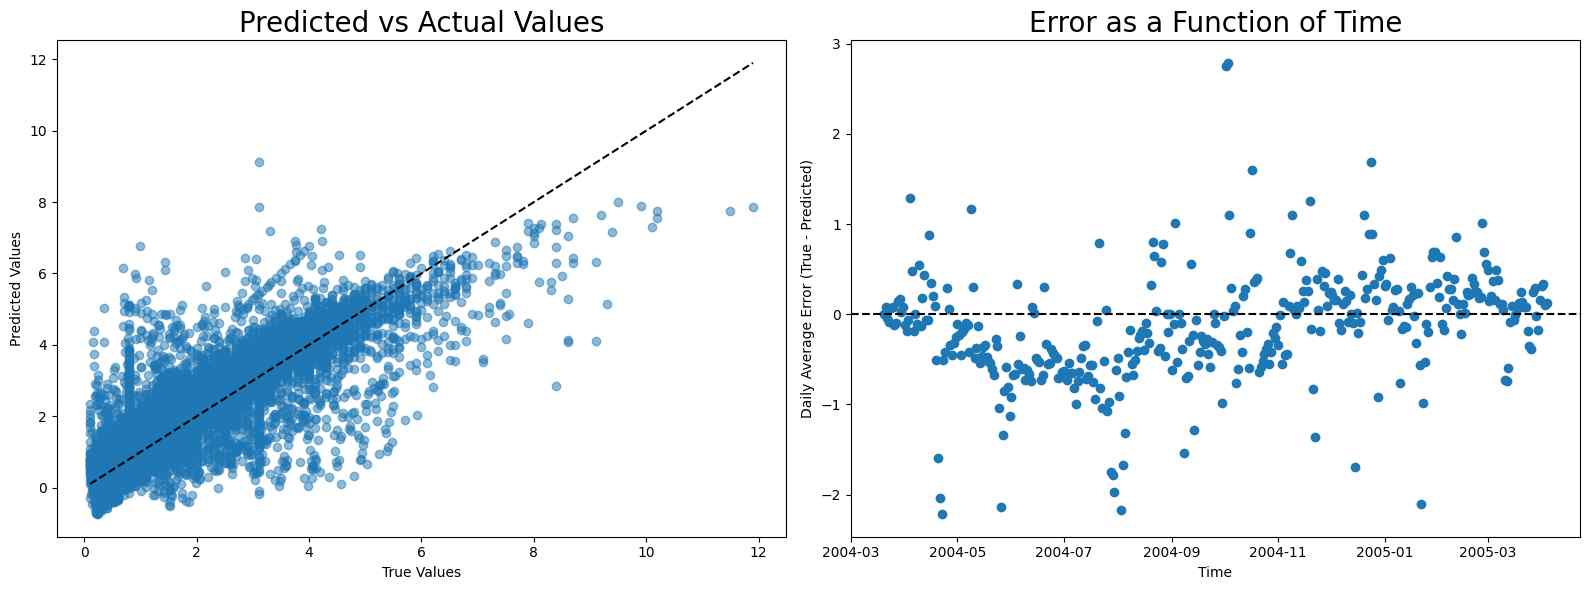 Linear regression calibration results for CO, highlighting error trends and model's fit over the course of the year.